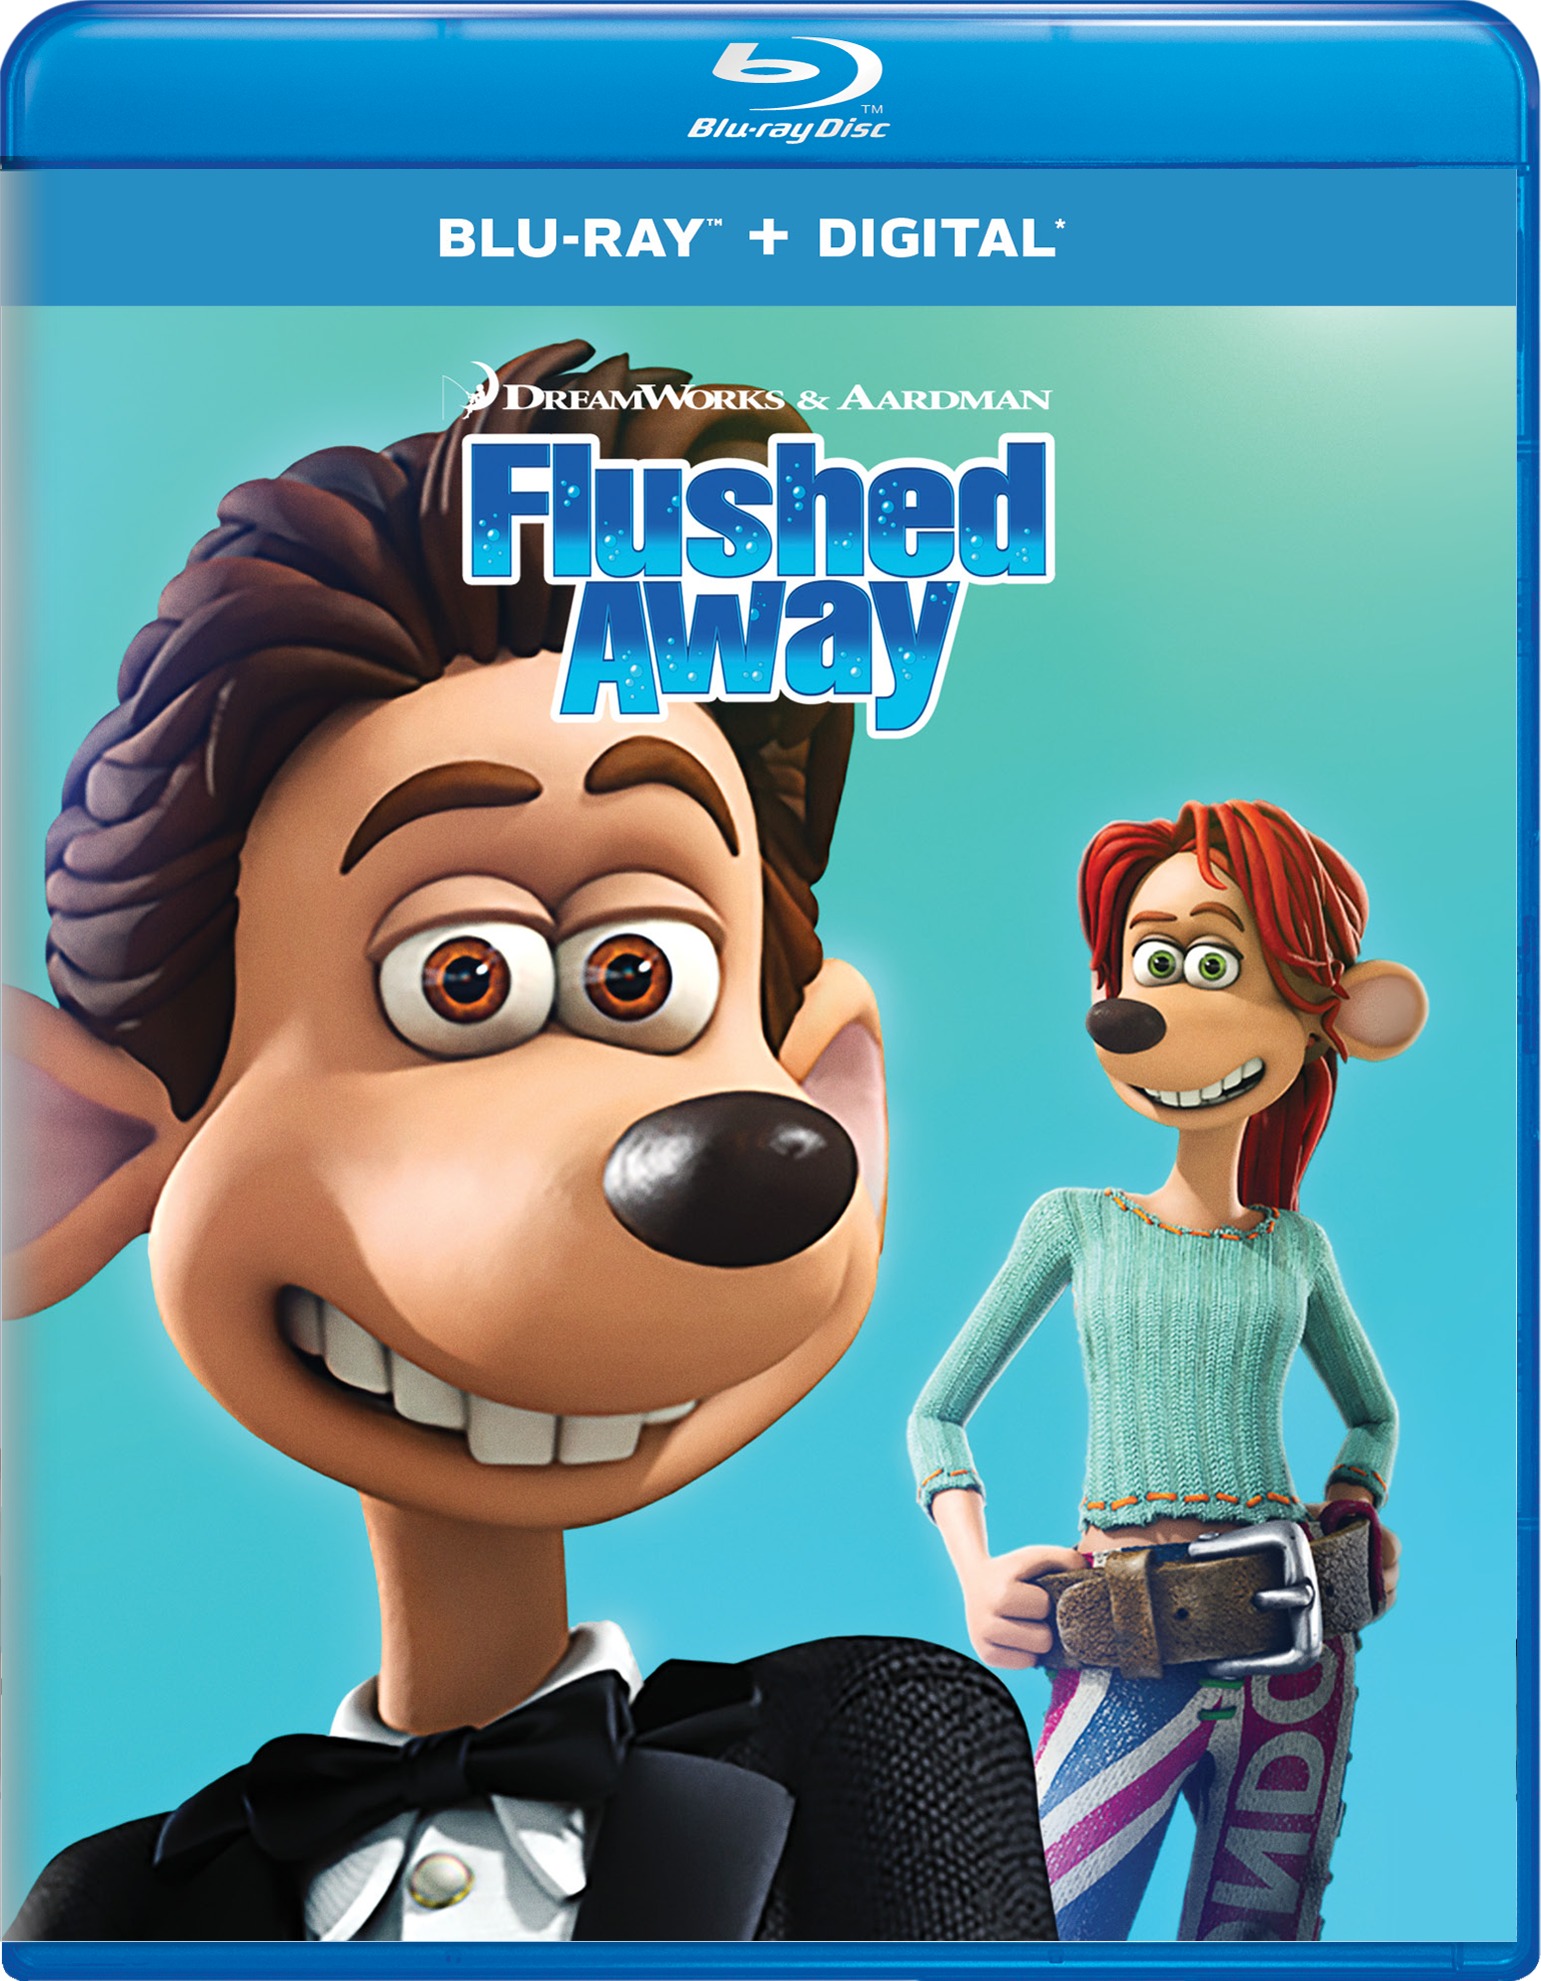 Flushed away game soundtrack in the kitchen - sbookaso